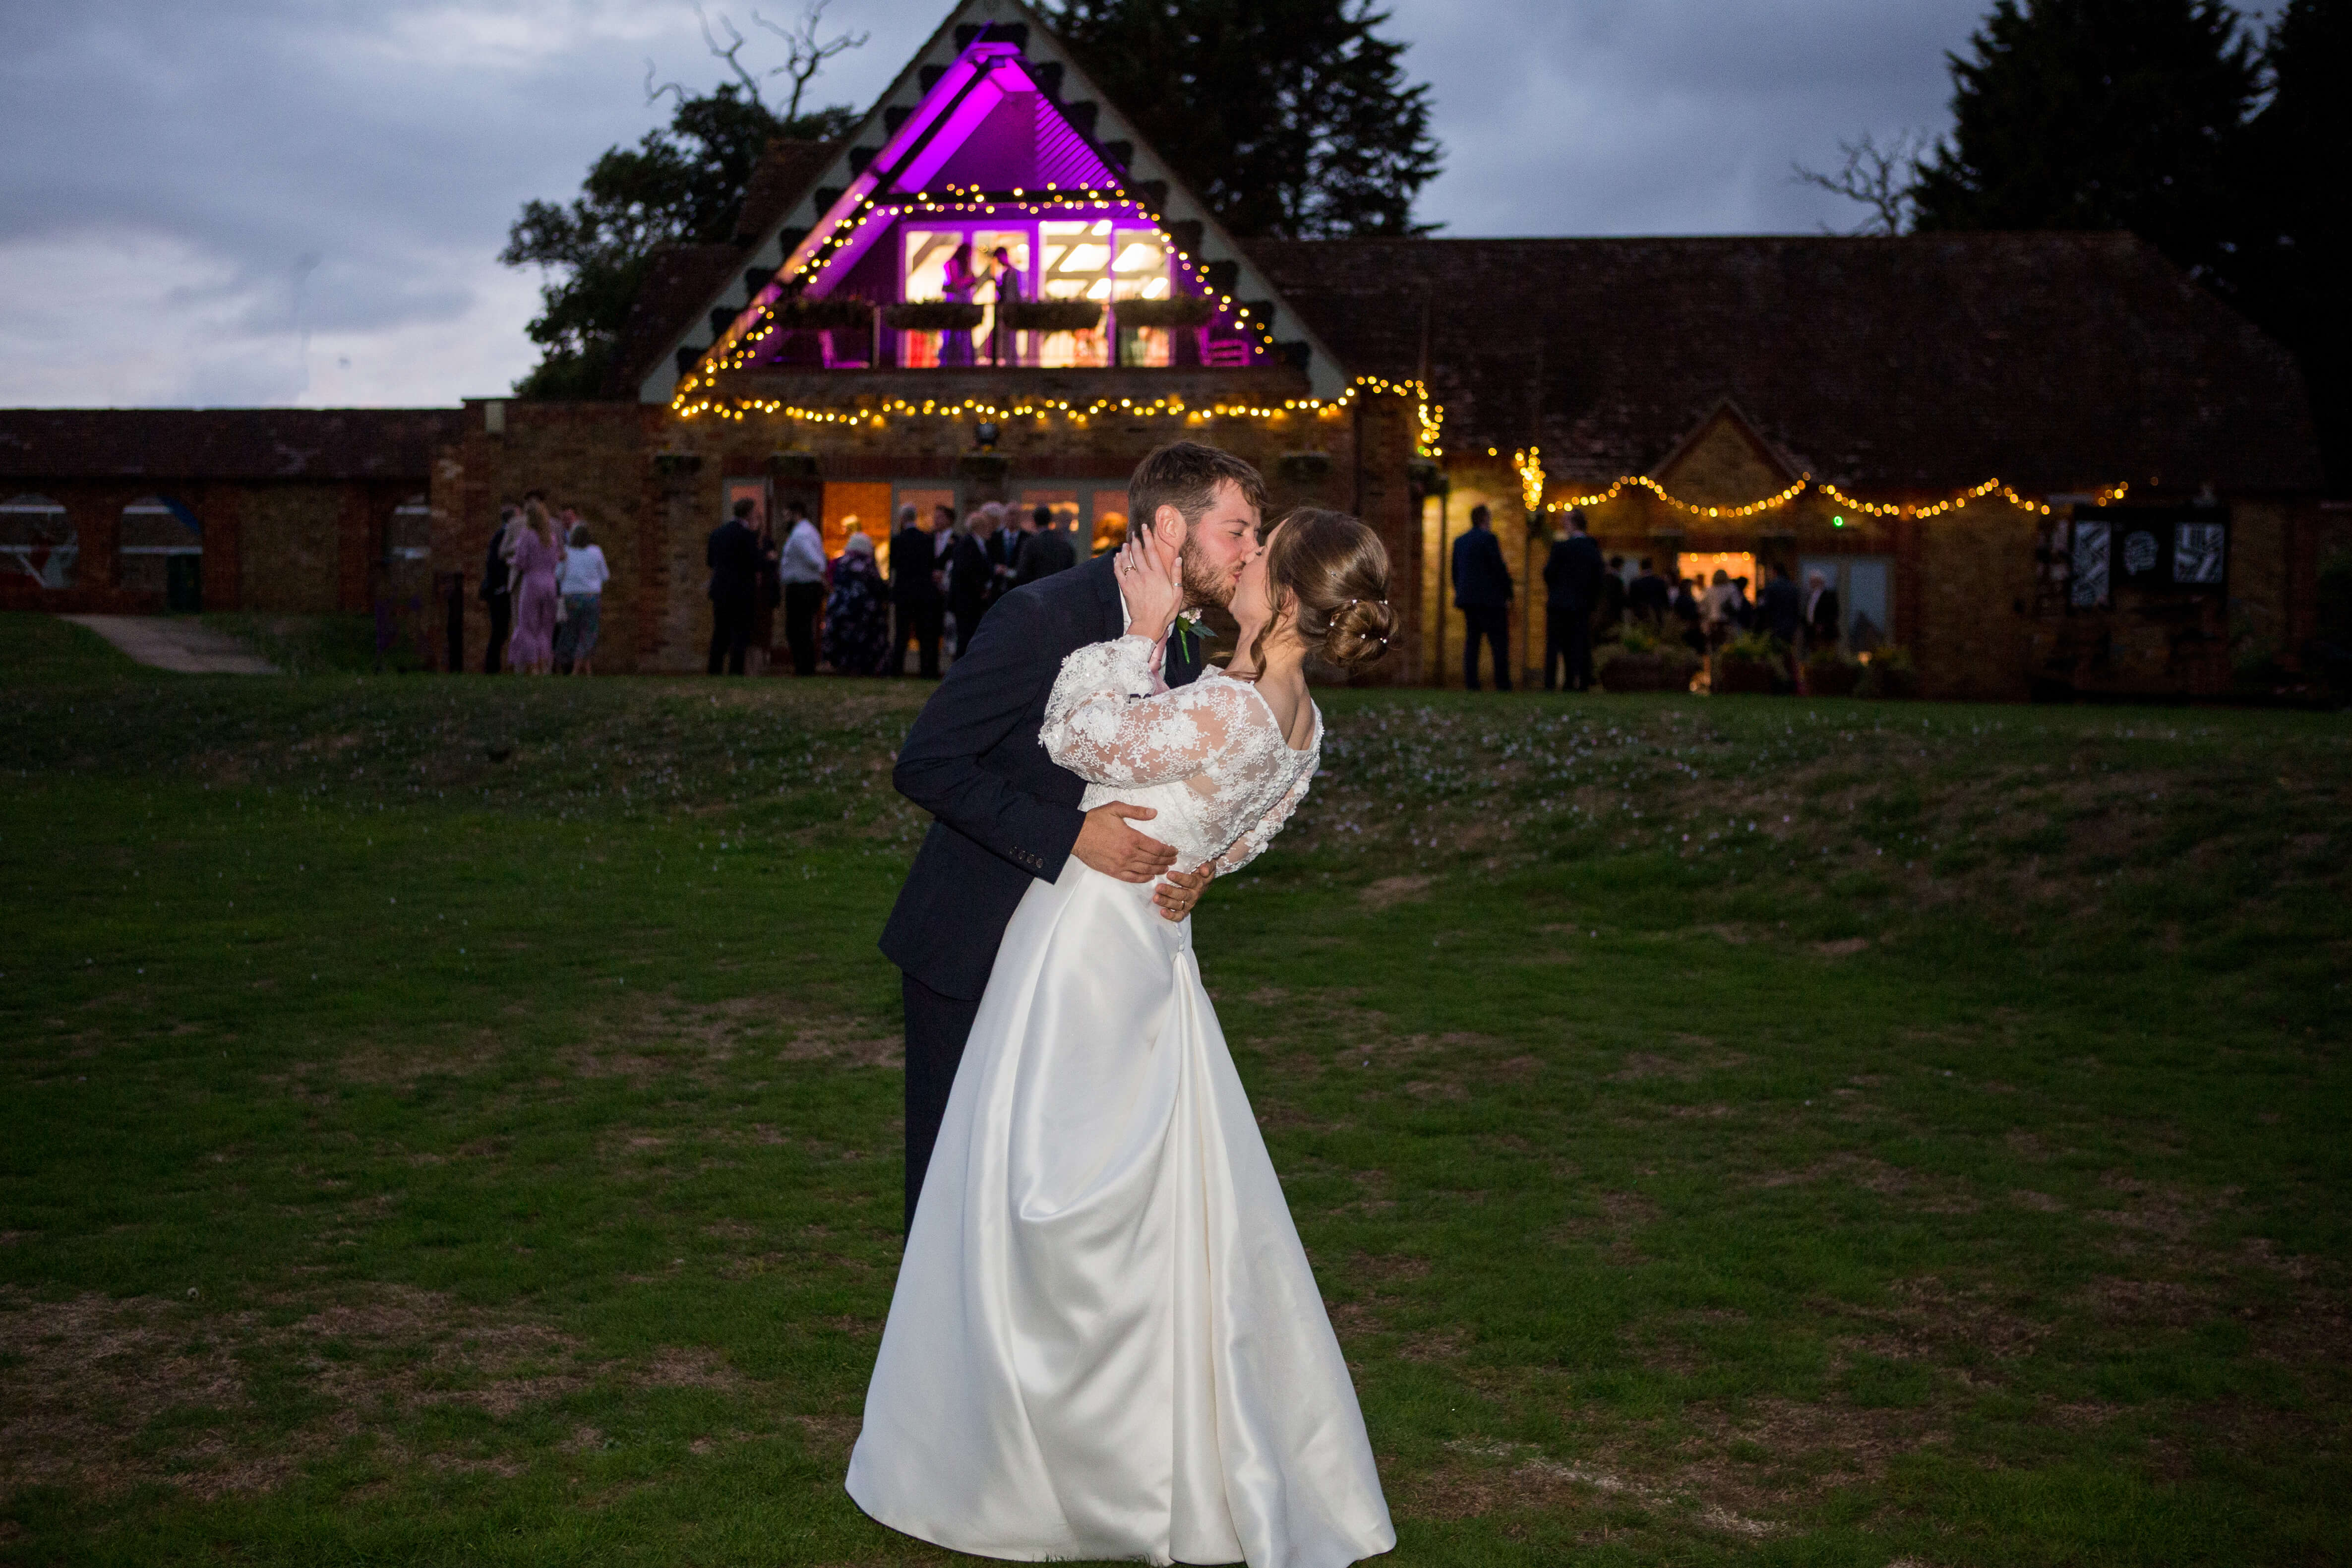 Bride and groom kissing in front of the wedding venue